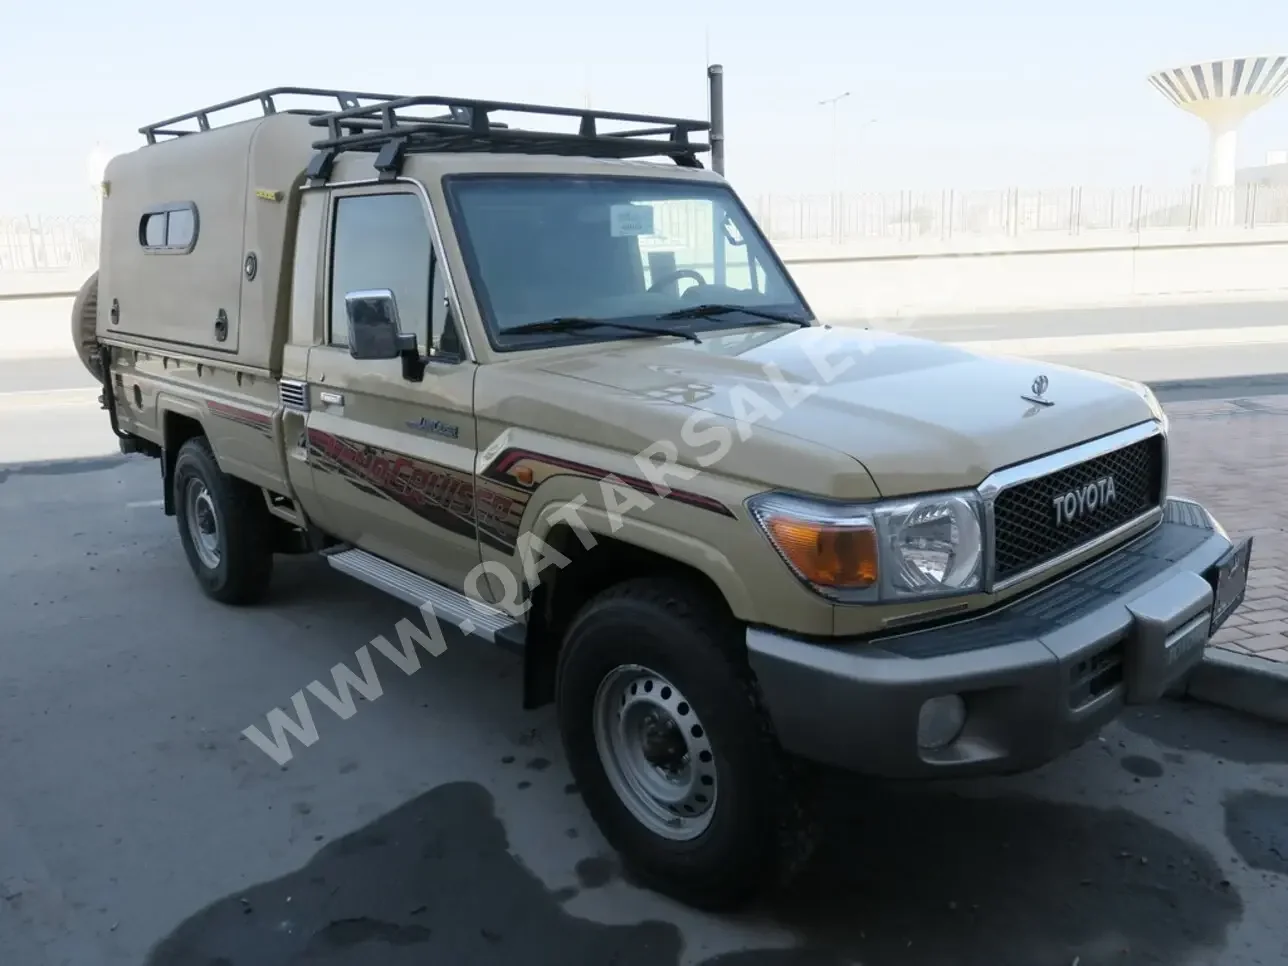 Toyota  Land Cruiser  LX  2022  Manual  5,000 Km  6 Cylinder  Four Wheel Drive (4WD)  Pick Up  Beige  With Warranty